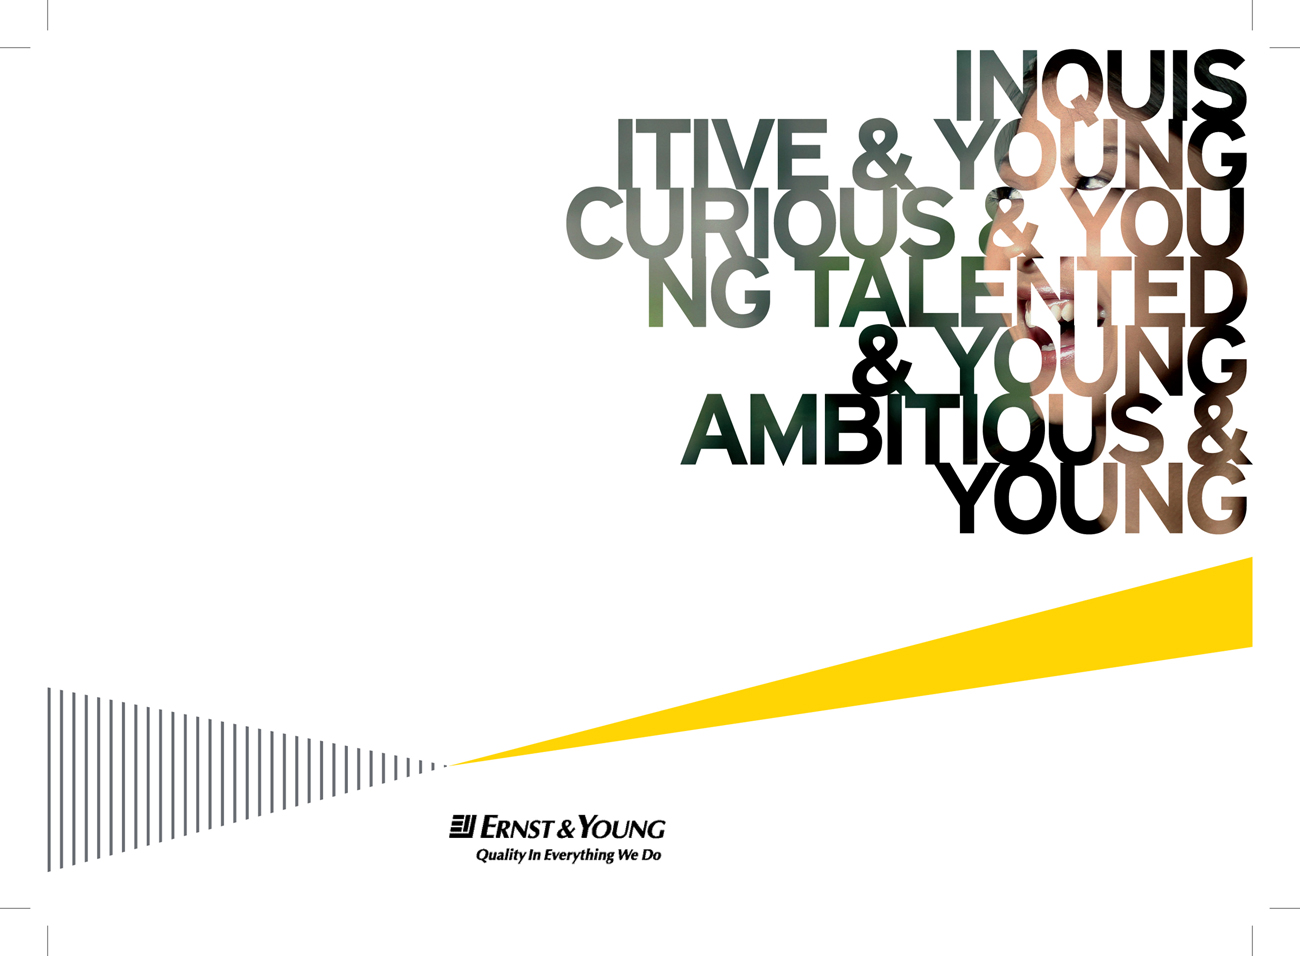 Corporate Shots for Ernst & Young. Creative by Blaze Advertising